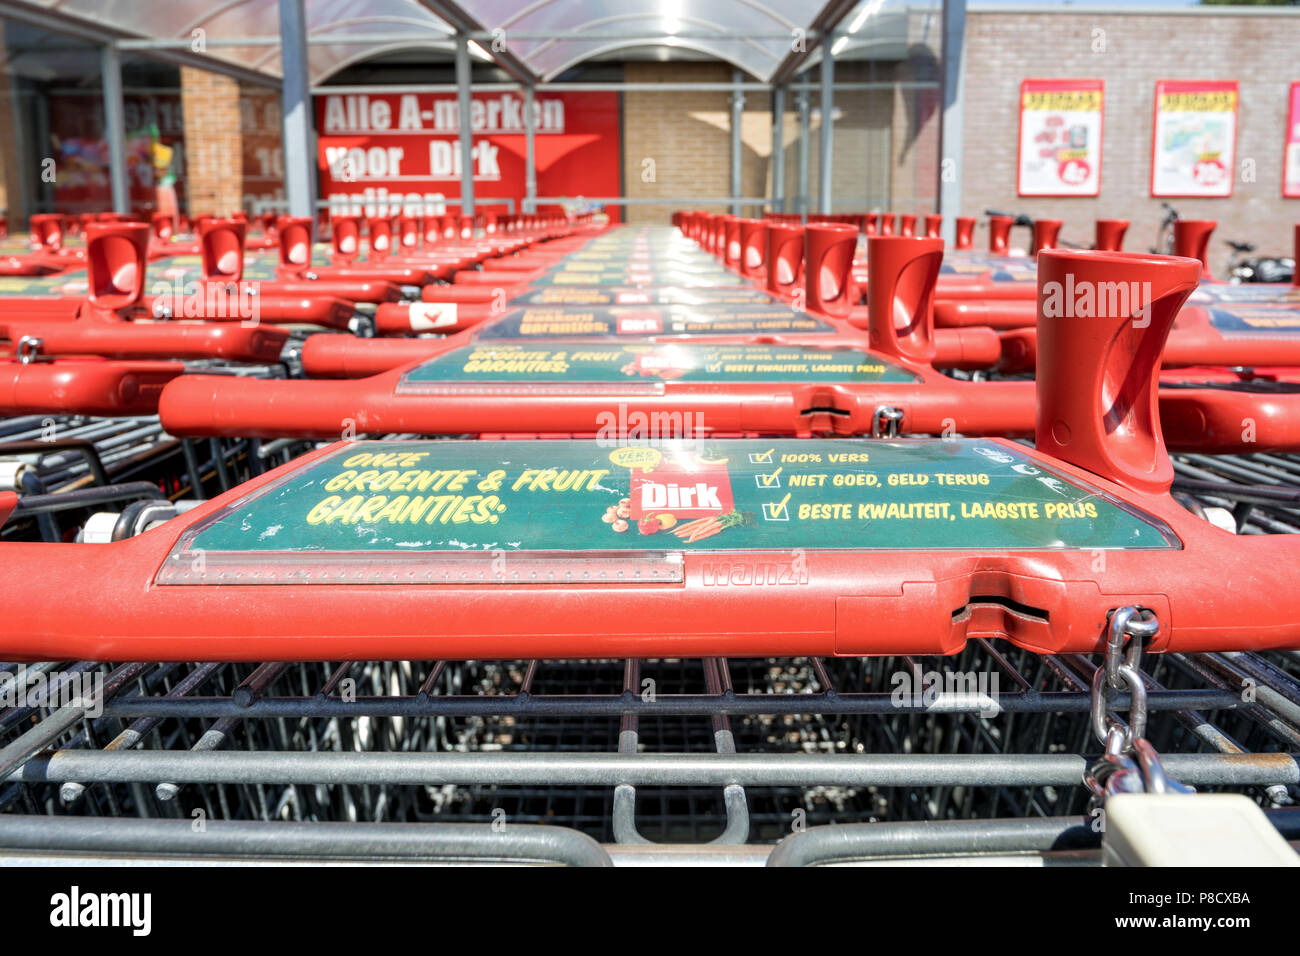 Dirk shopping carts. Dirk van den Broek is a Dutch retail company and a member of Superunie, a Dutch purchasing organization for supermarkets. Stock Photo